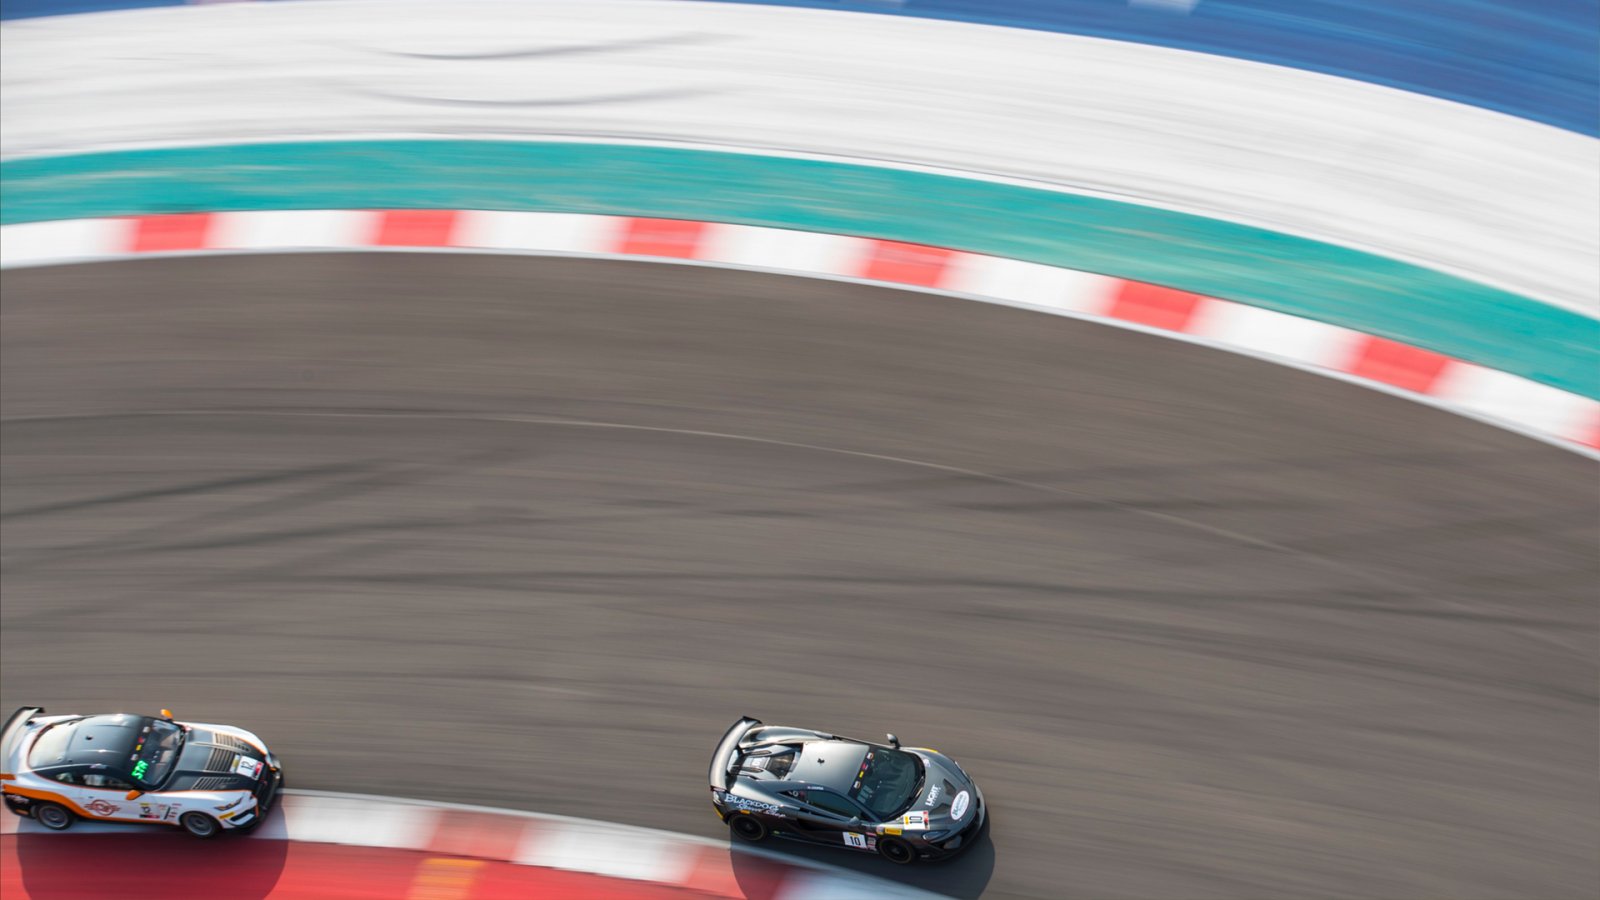 TEXAS TWO-STEP: Cooper, Gaples Take GT4 Sprint Podiums at COTA